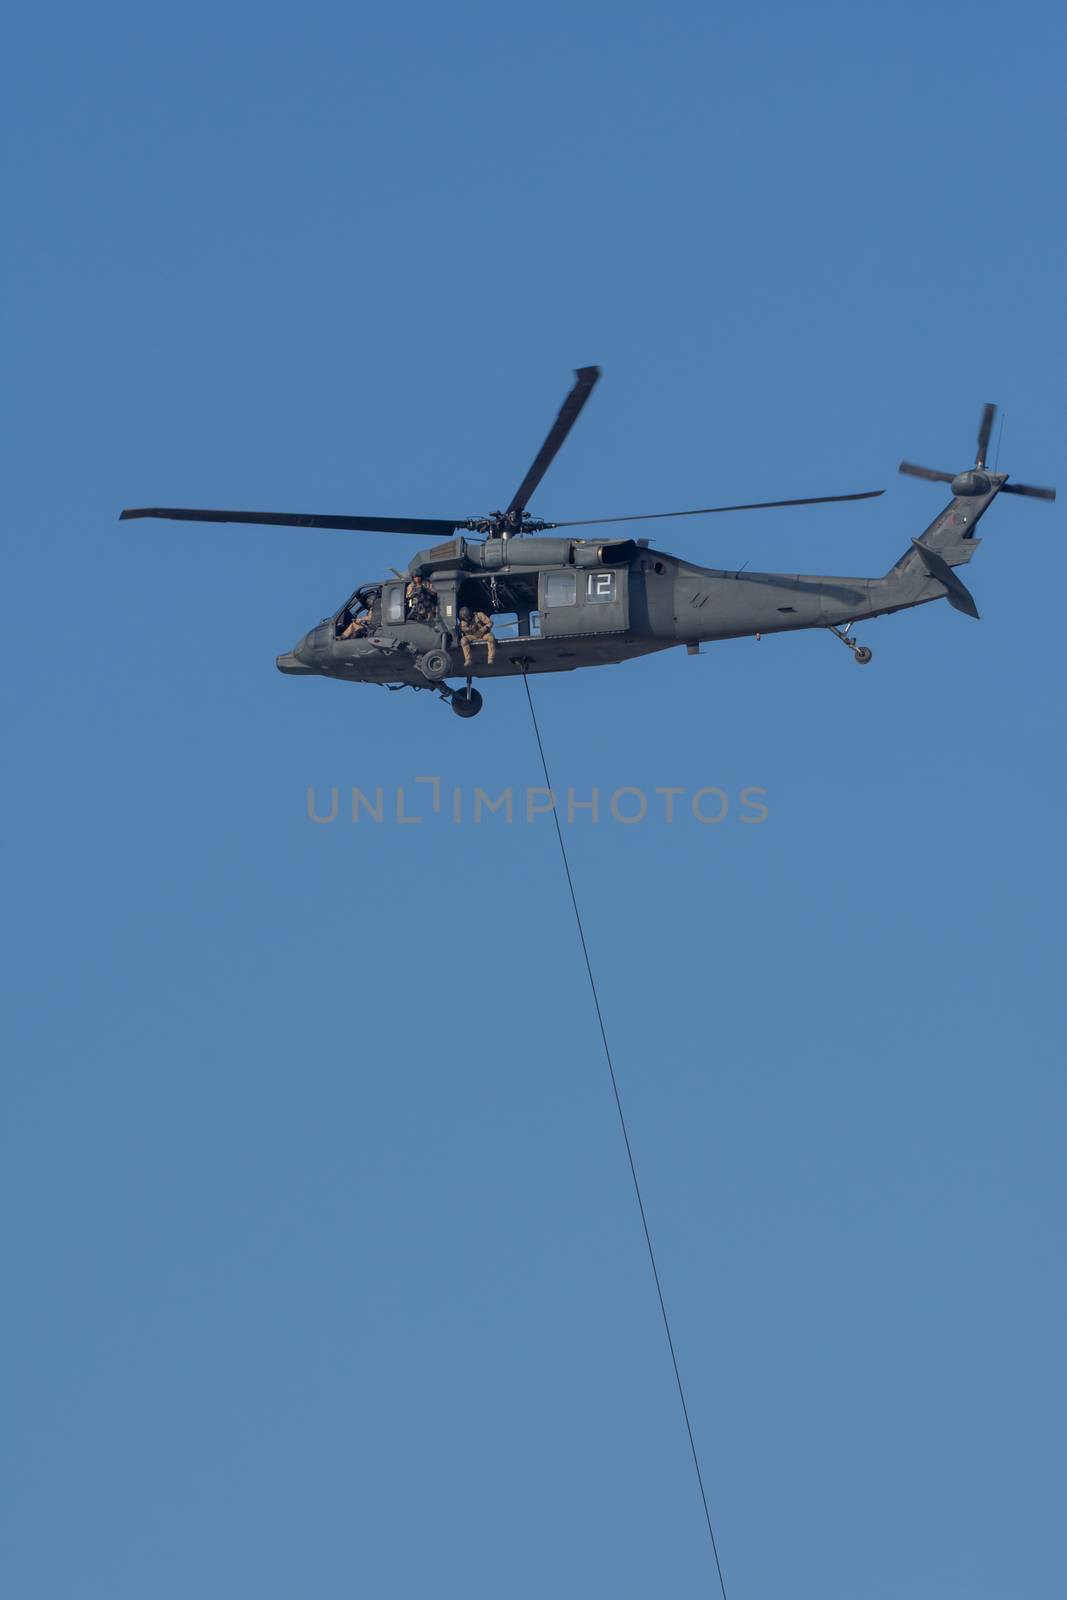 Military team in conflict resucing people by helicopter. dropping a rope attached to chopper in the MIddle East conflict.